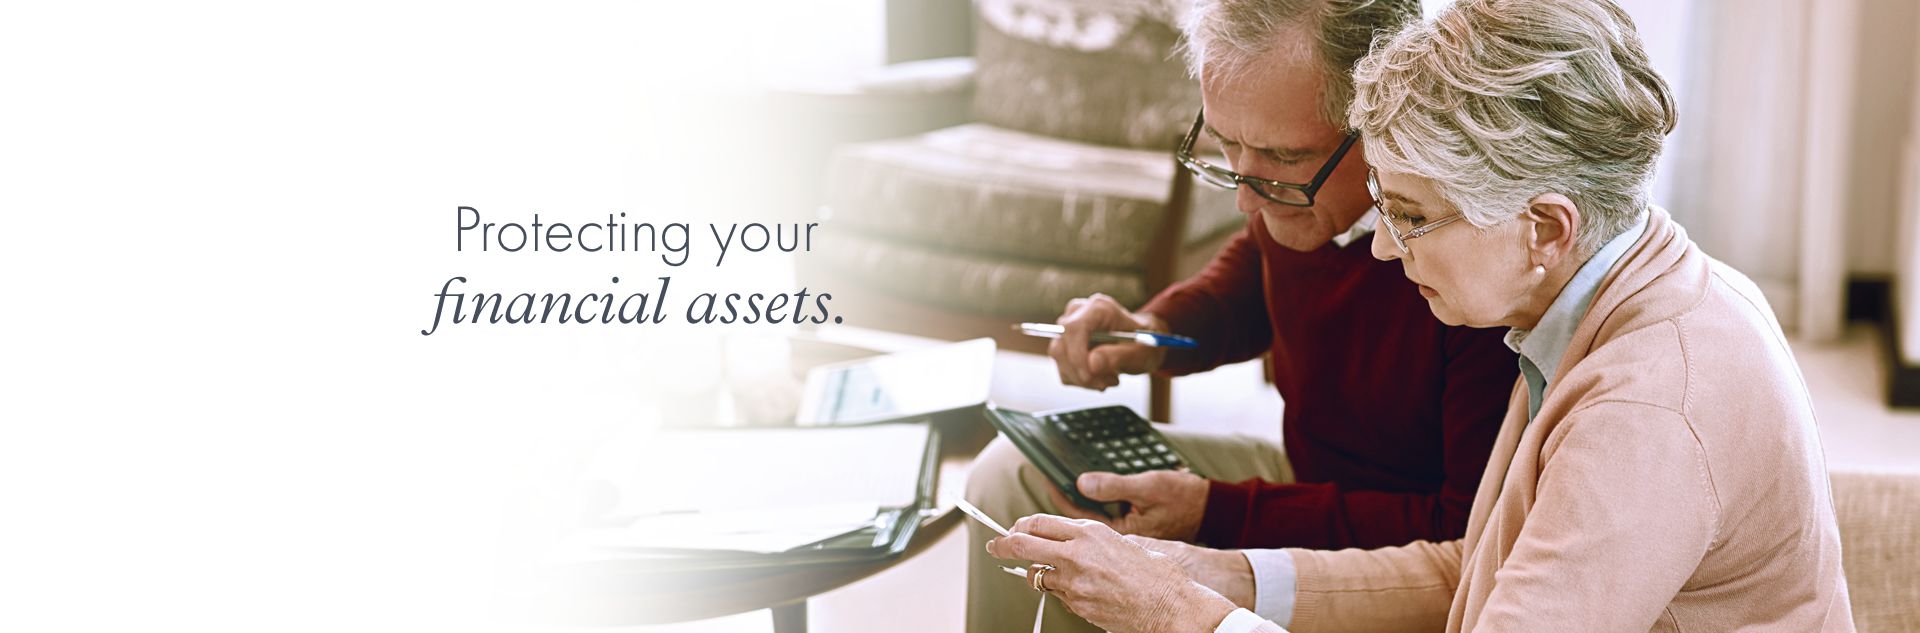 Protecting your financial assets.